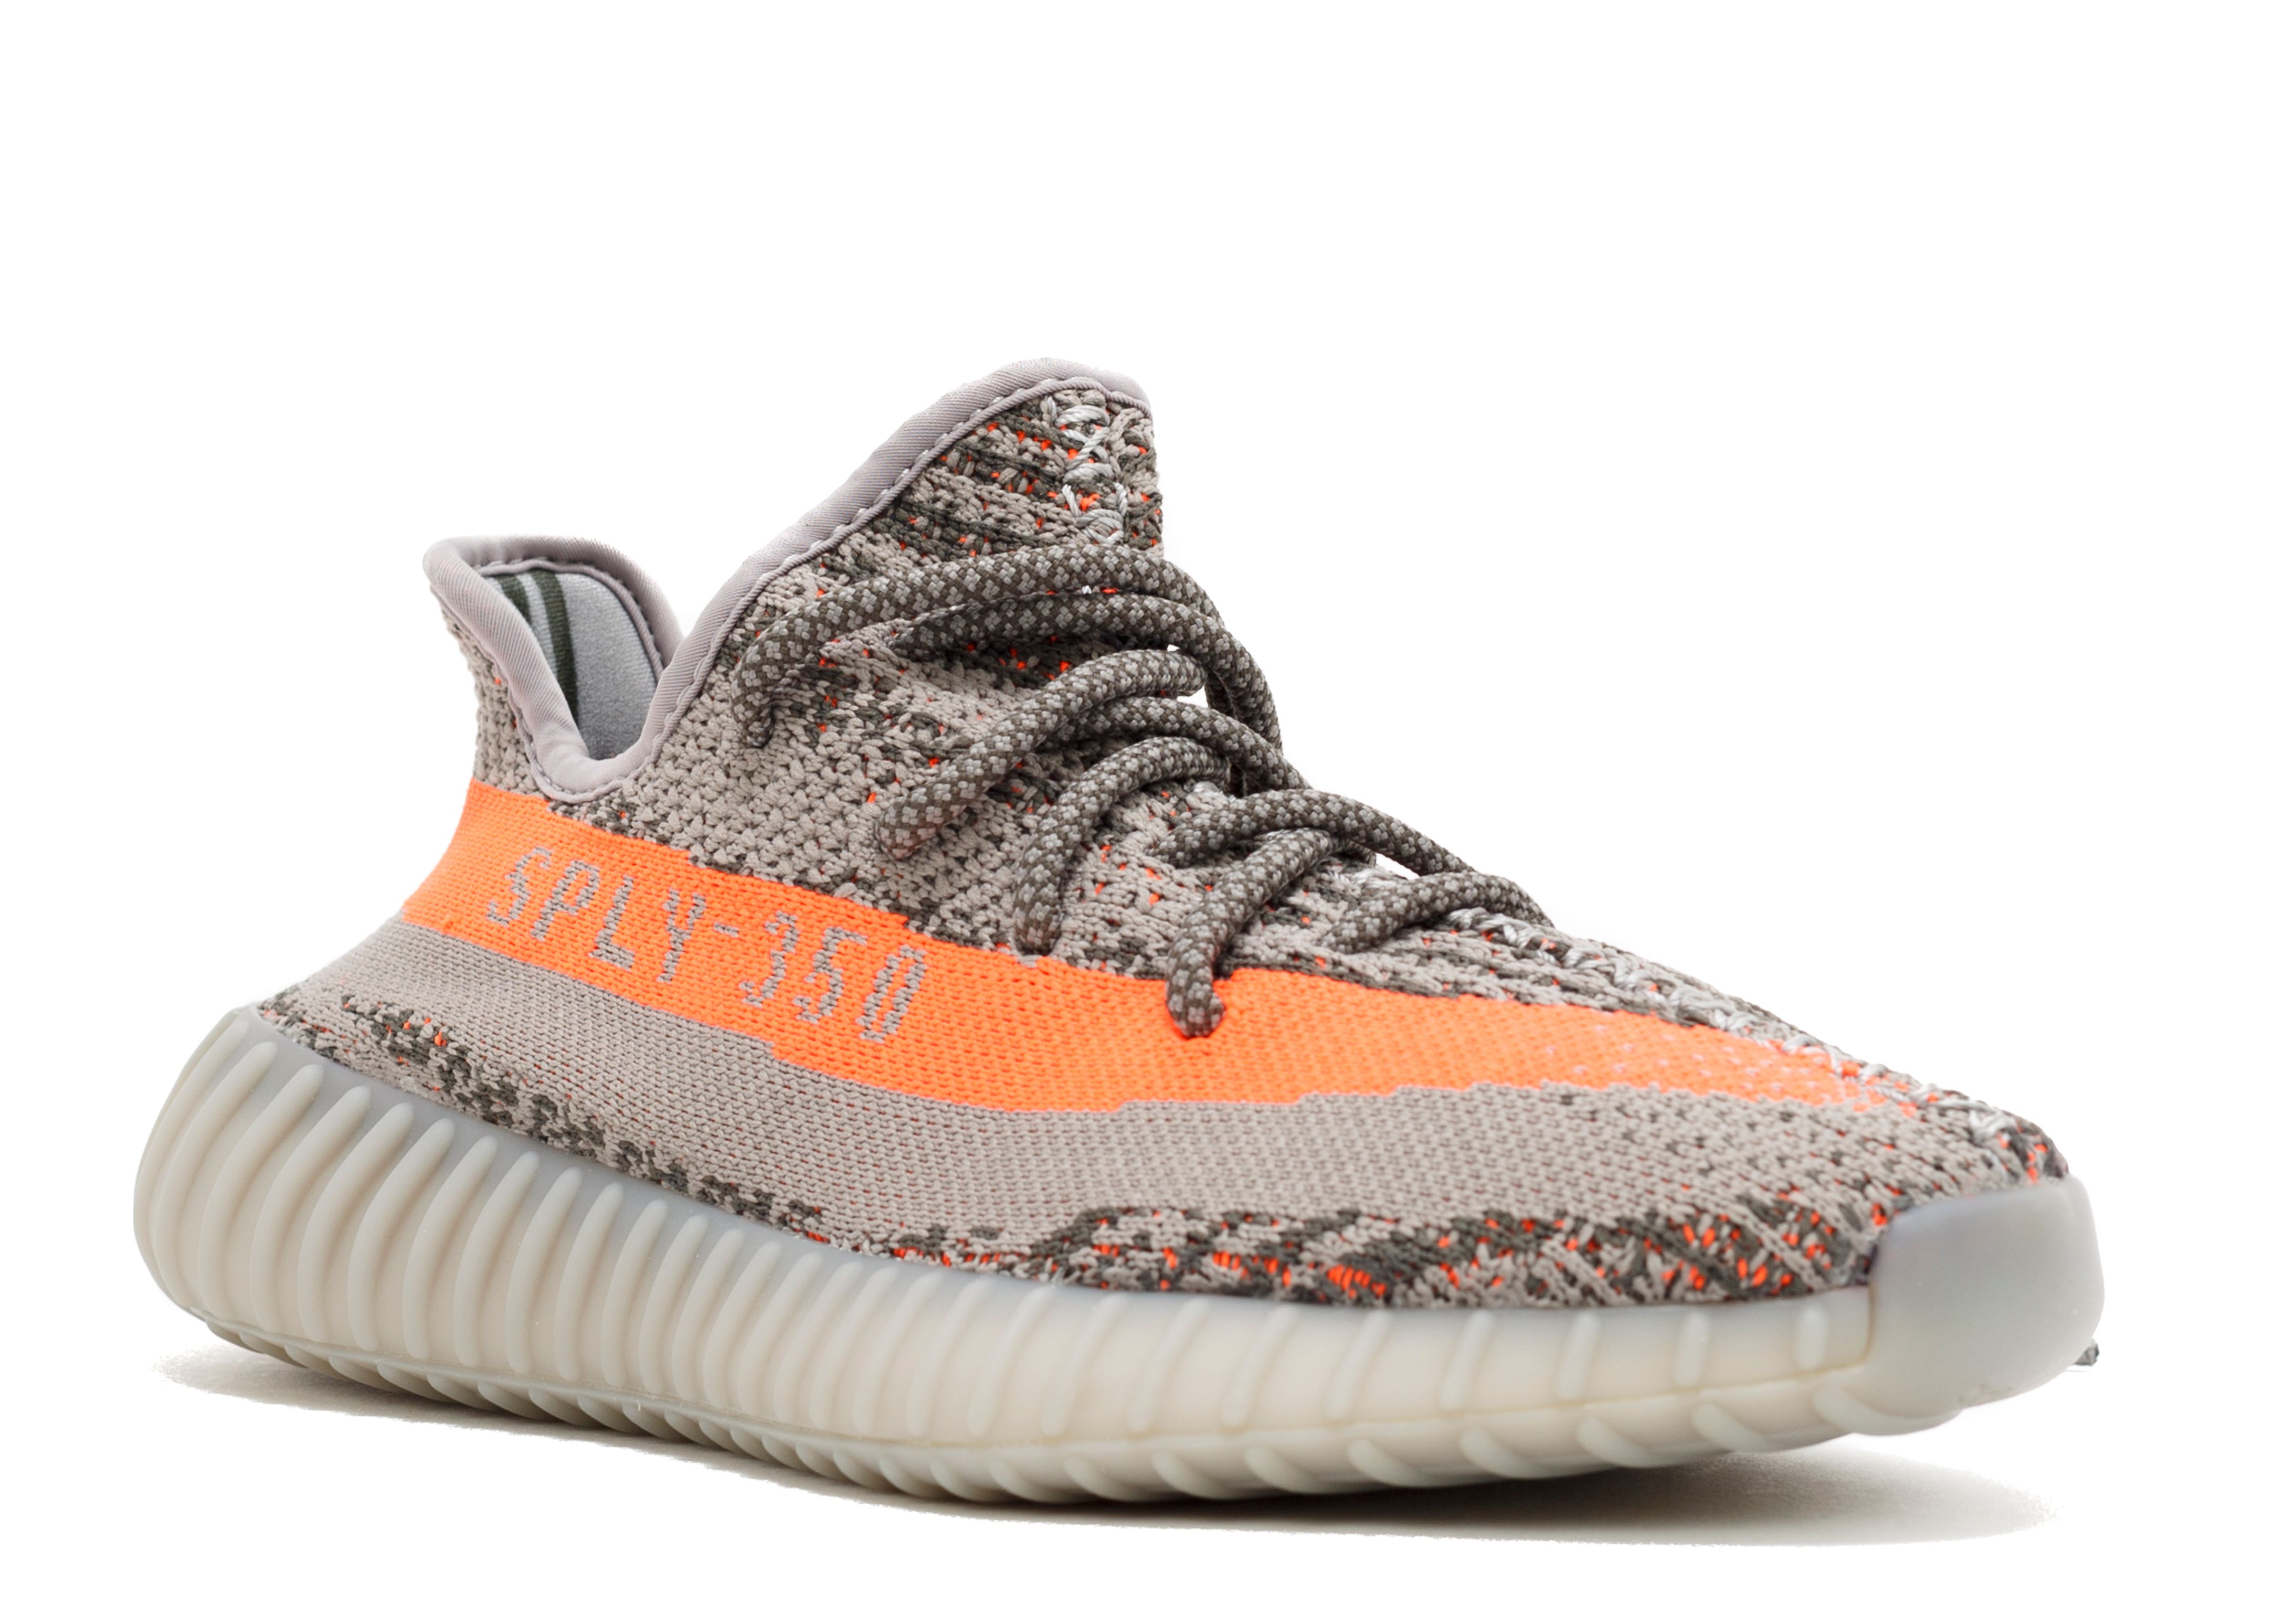 Frist Look Best UA Yeezy boost 350 V2 